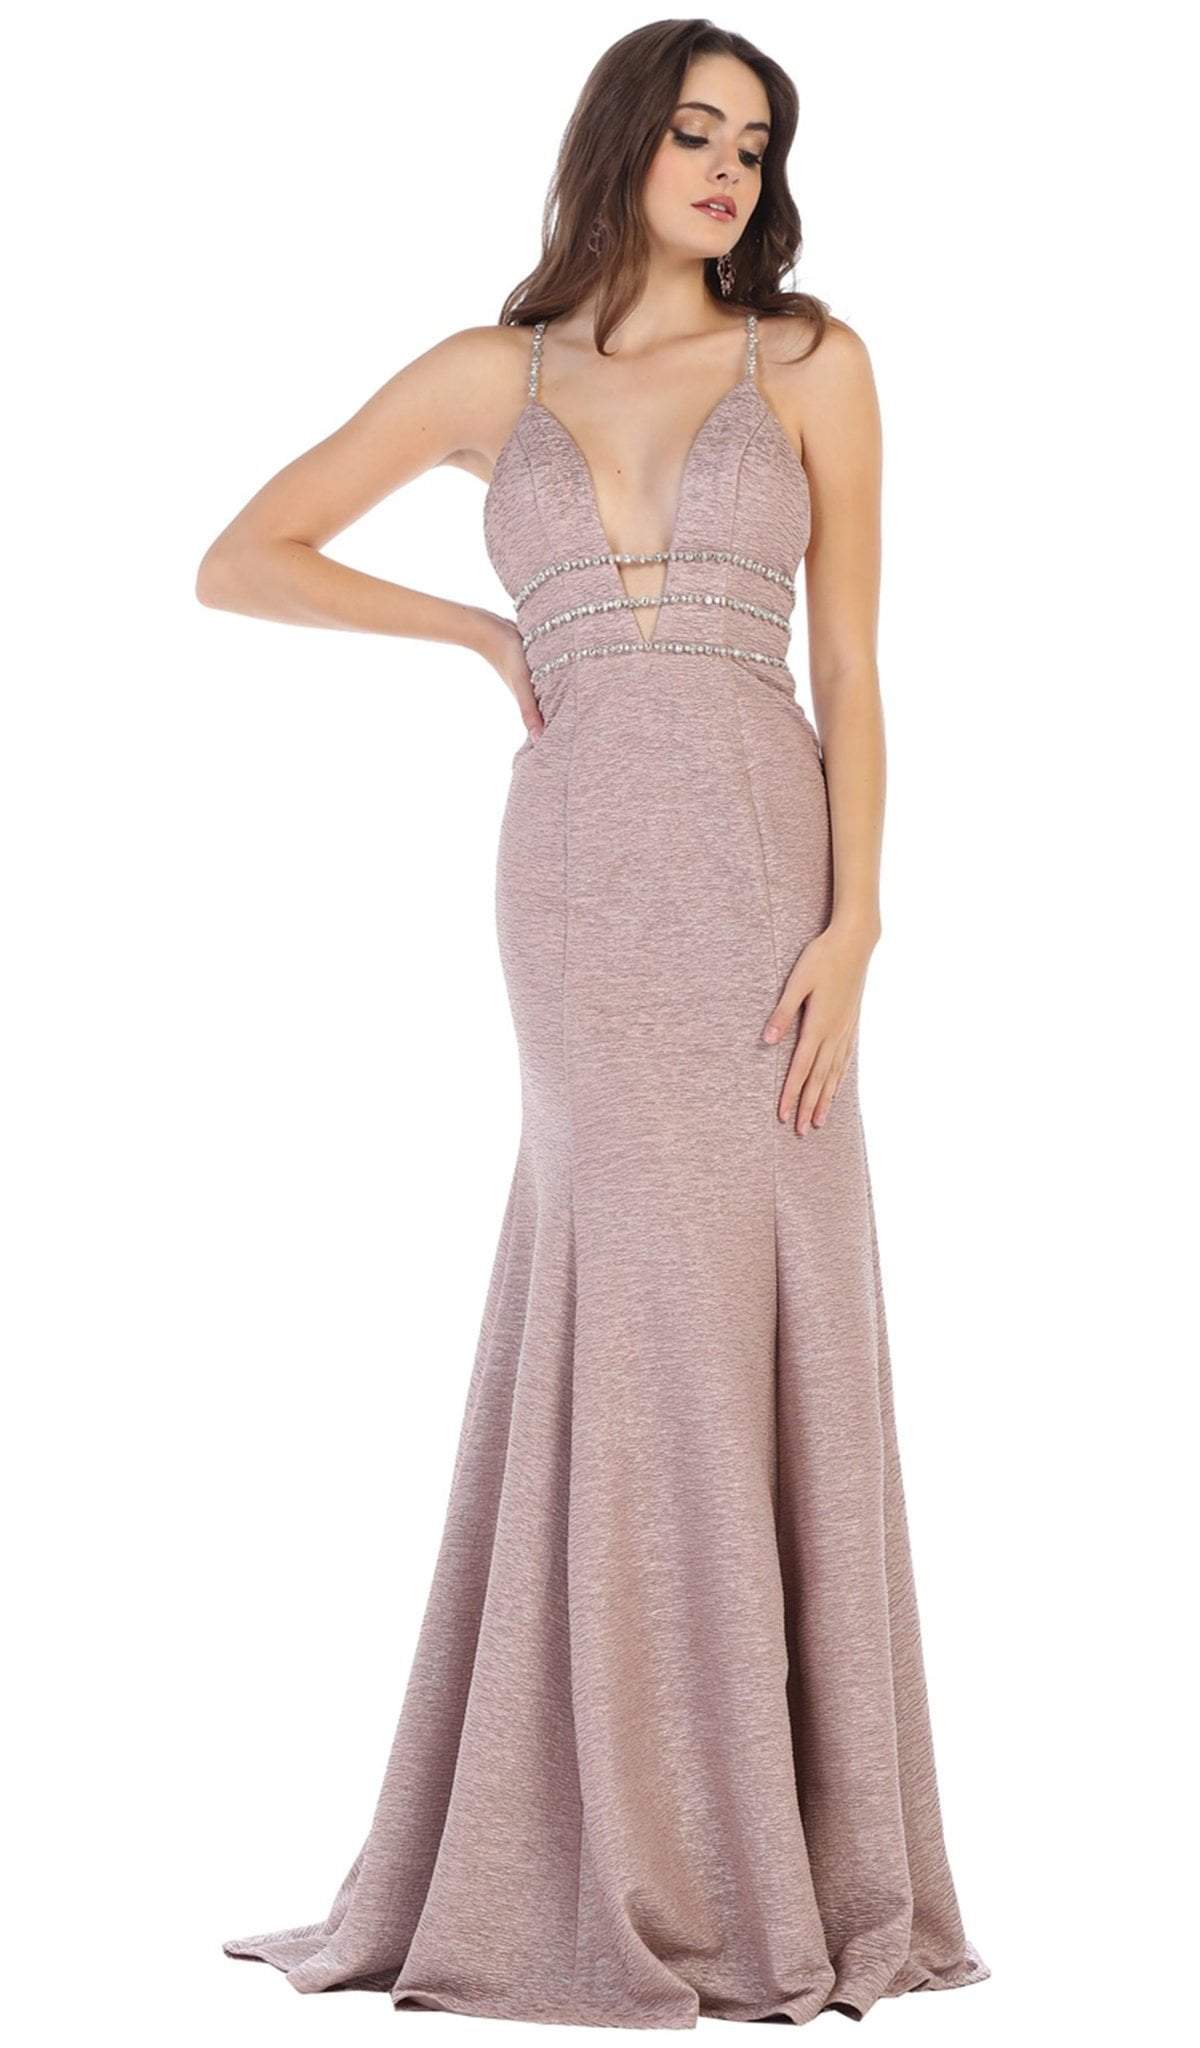 May Queen - RQ7638 Crystalline Tri-Band Plunging Trumpet Gown Special Occasion Dress 2 / Mauve